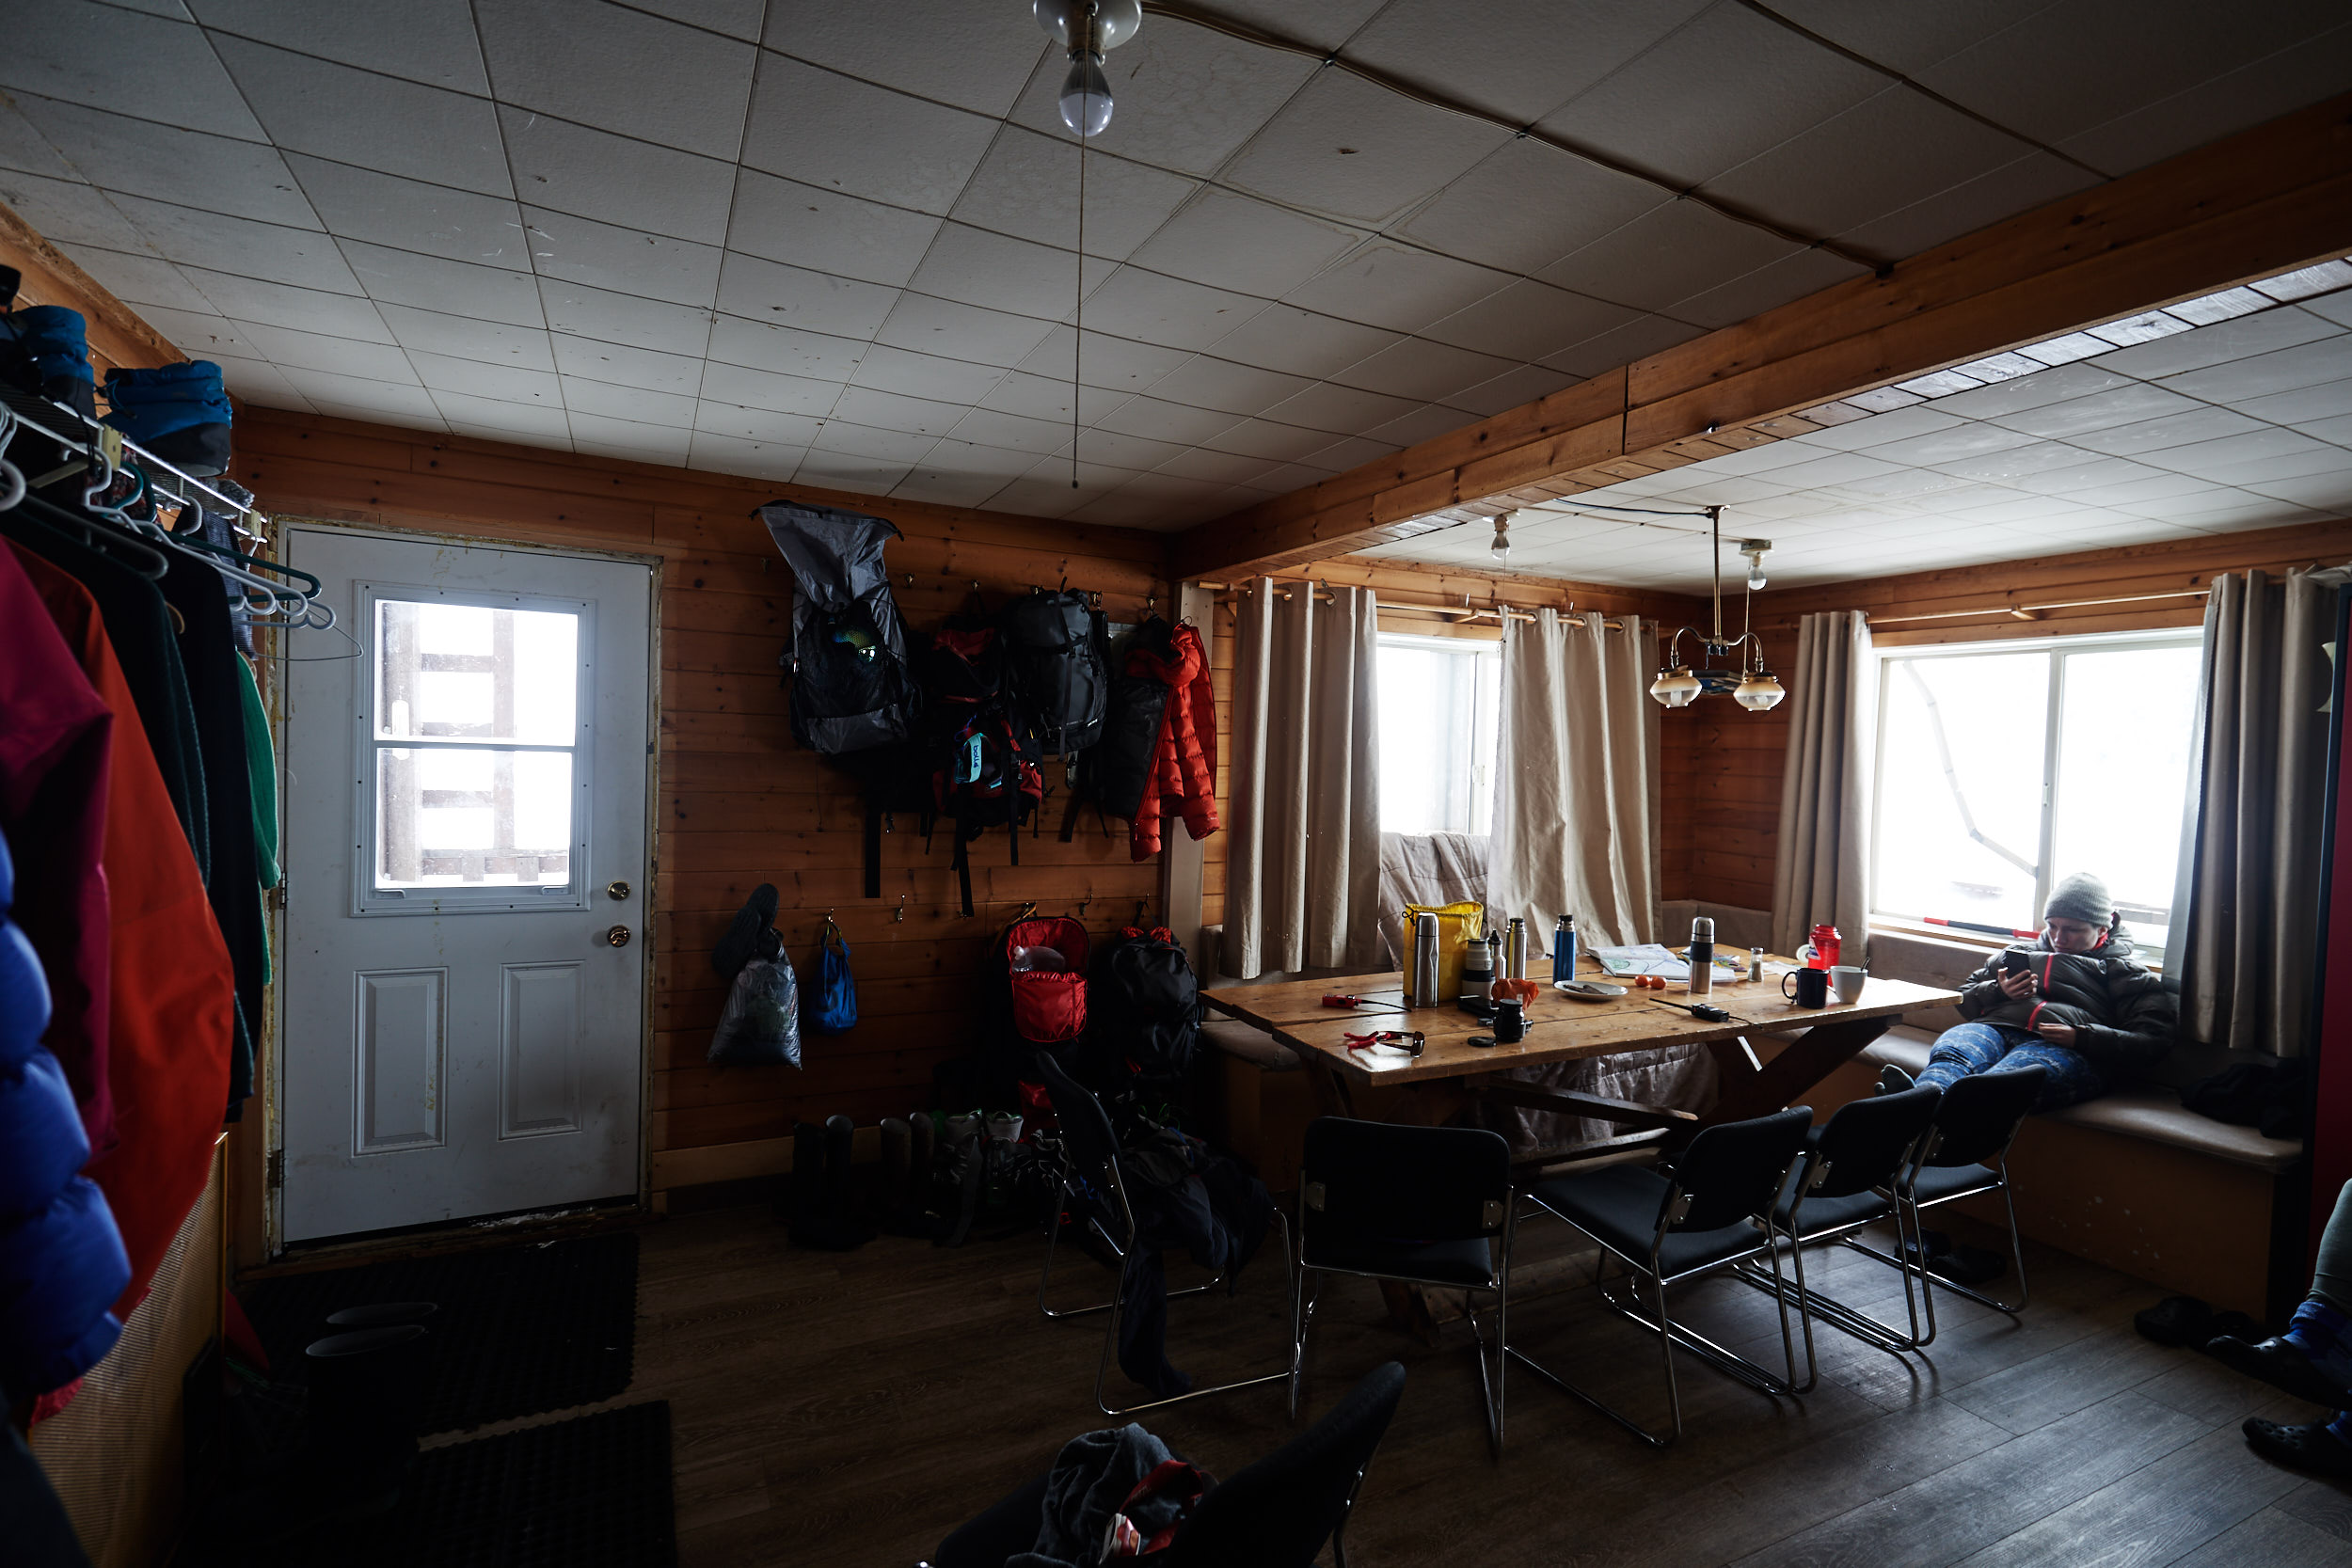  The hut was spacious with tons of places to hang your gear to let it dry each day. 